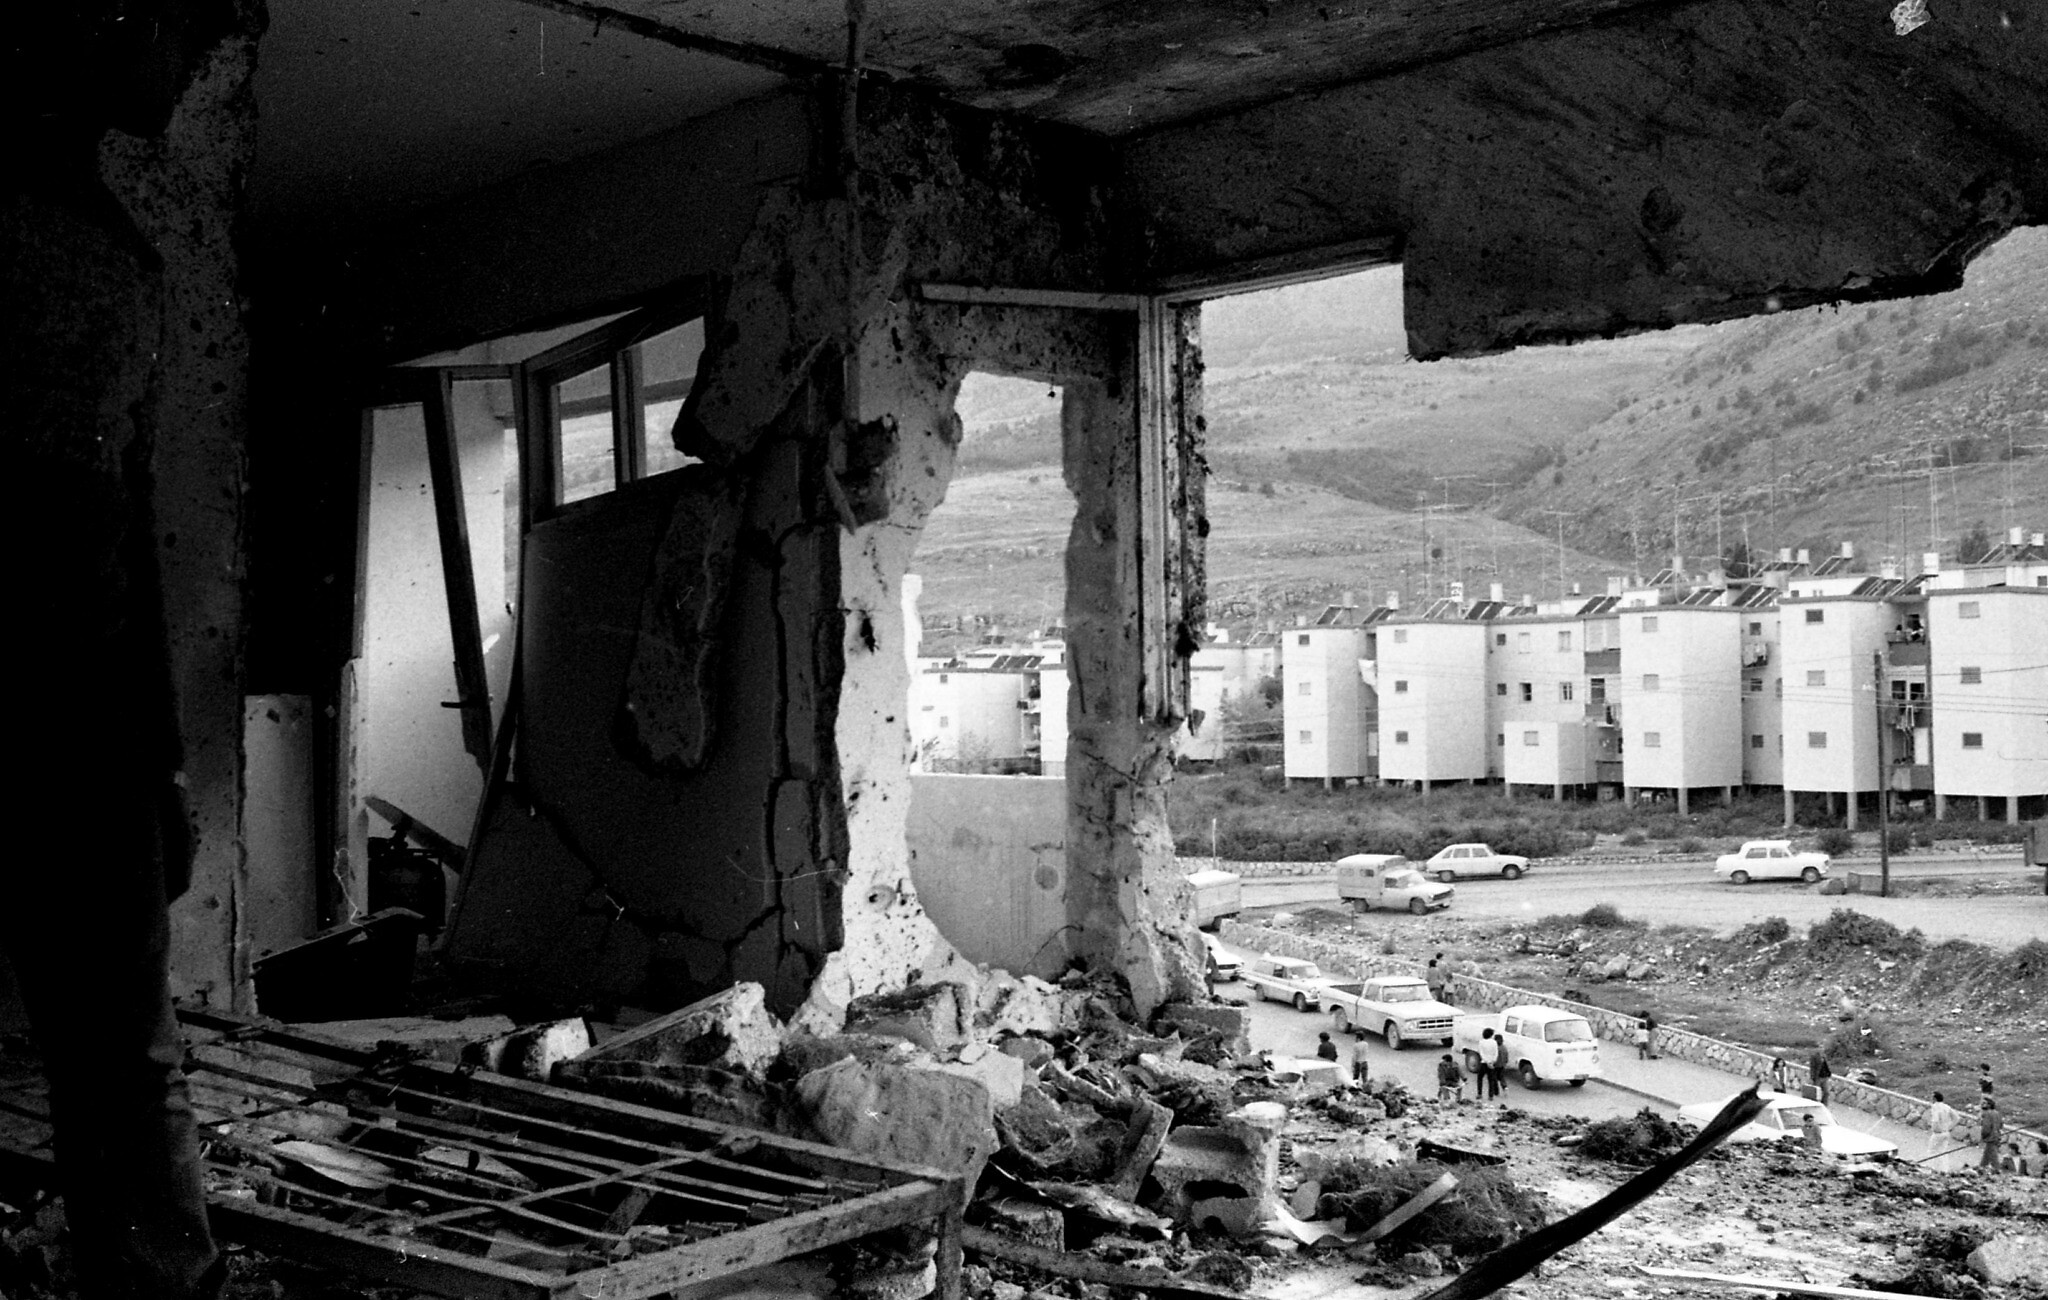 A view from the building at 15 Yehuda Halevi Street in Kiryat Shmona after the terrorists were killed, April 11, 1974. (Dan Hadani/IPPA/National Library of Israel)